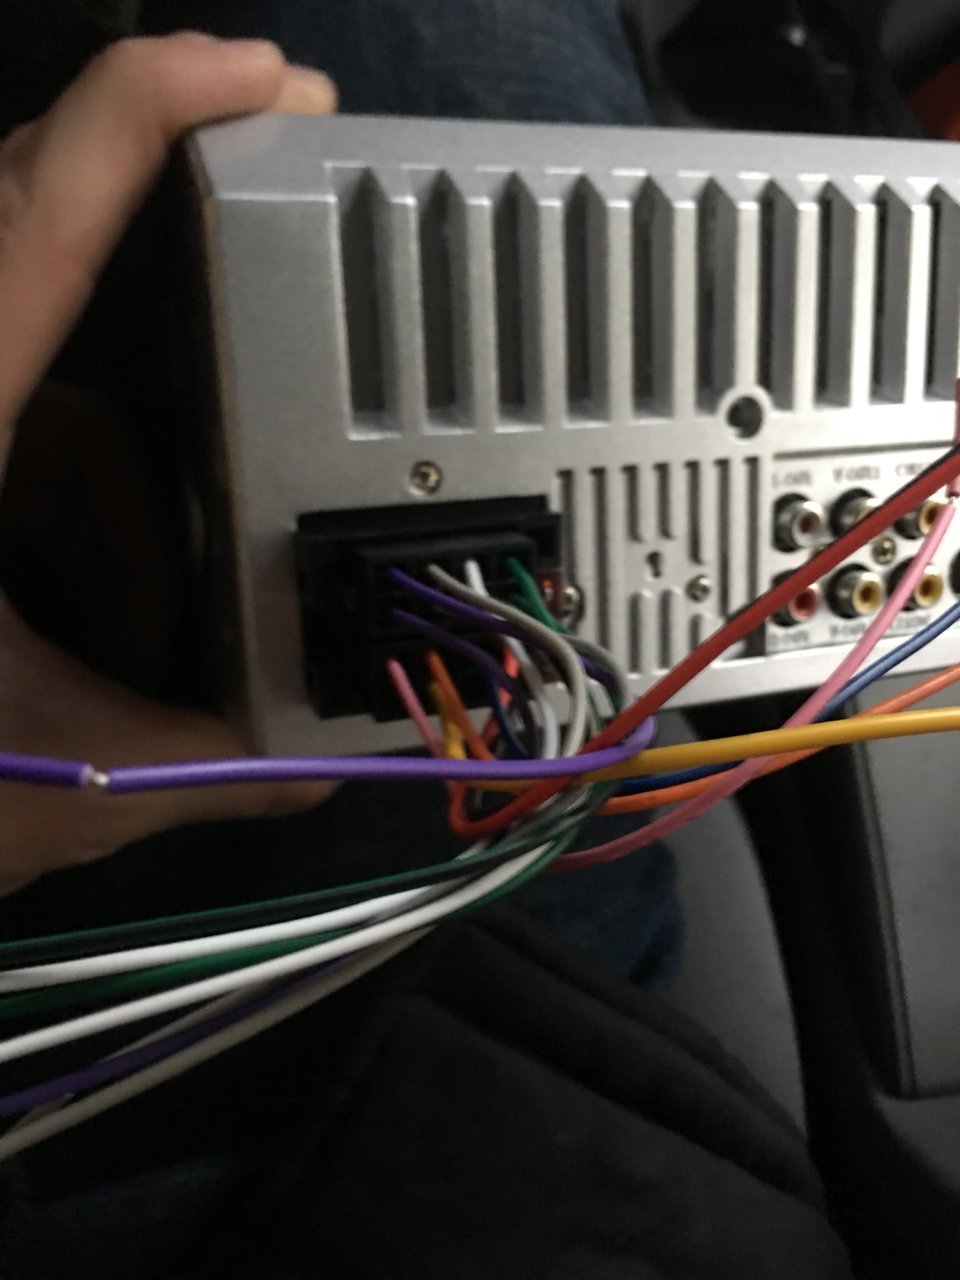 40 Toyota Tacoma Stereo Wiring Diagram - Wiring Diagram Online Source